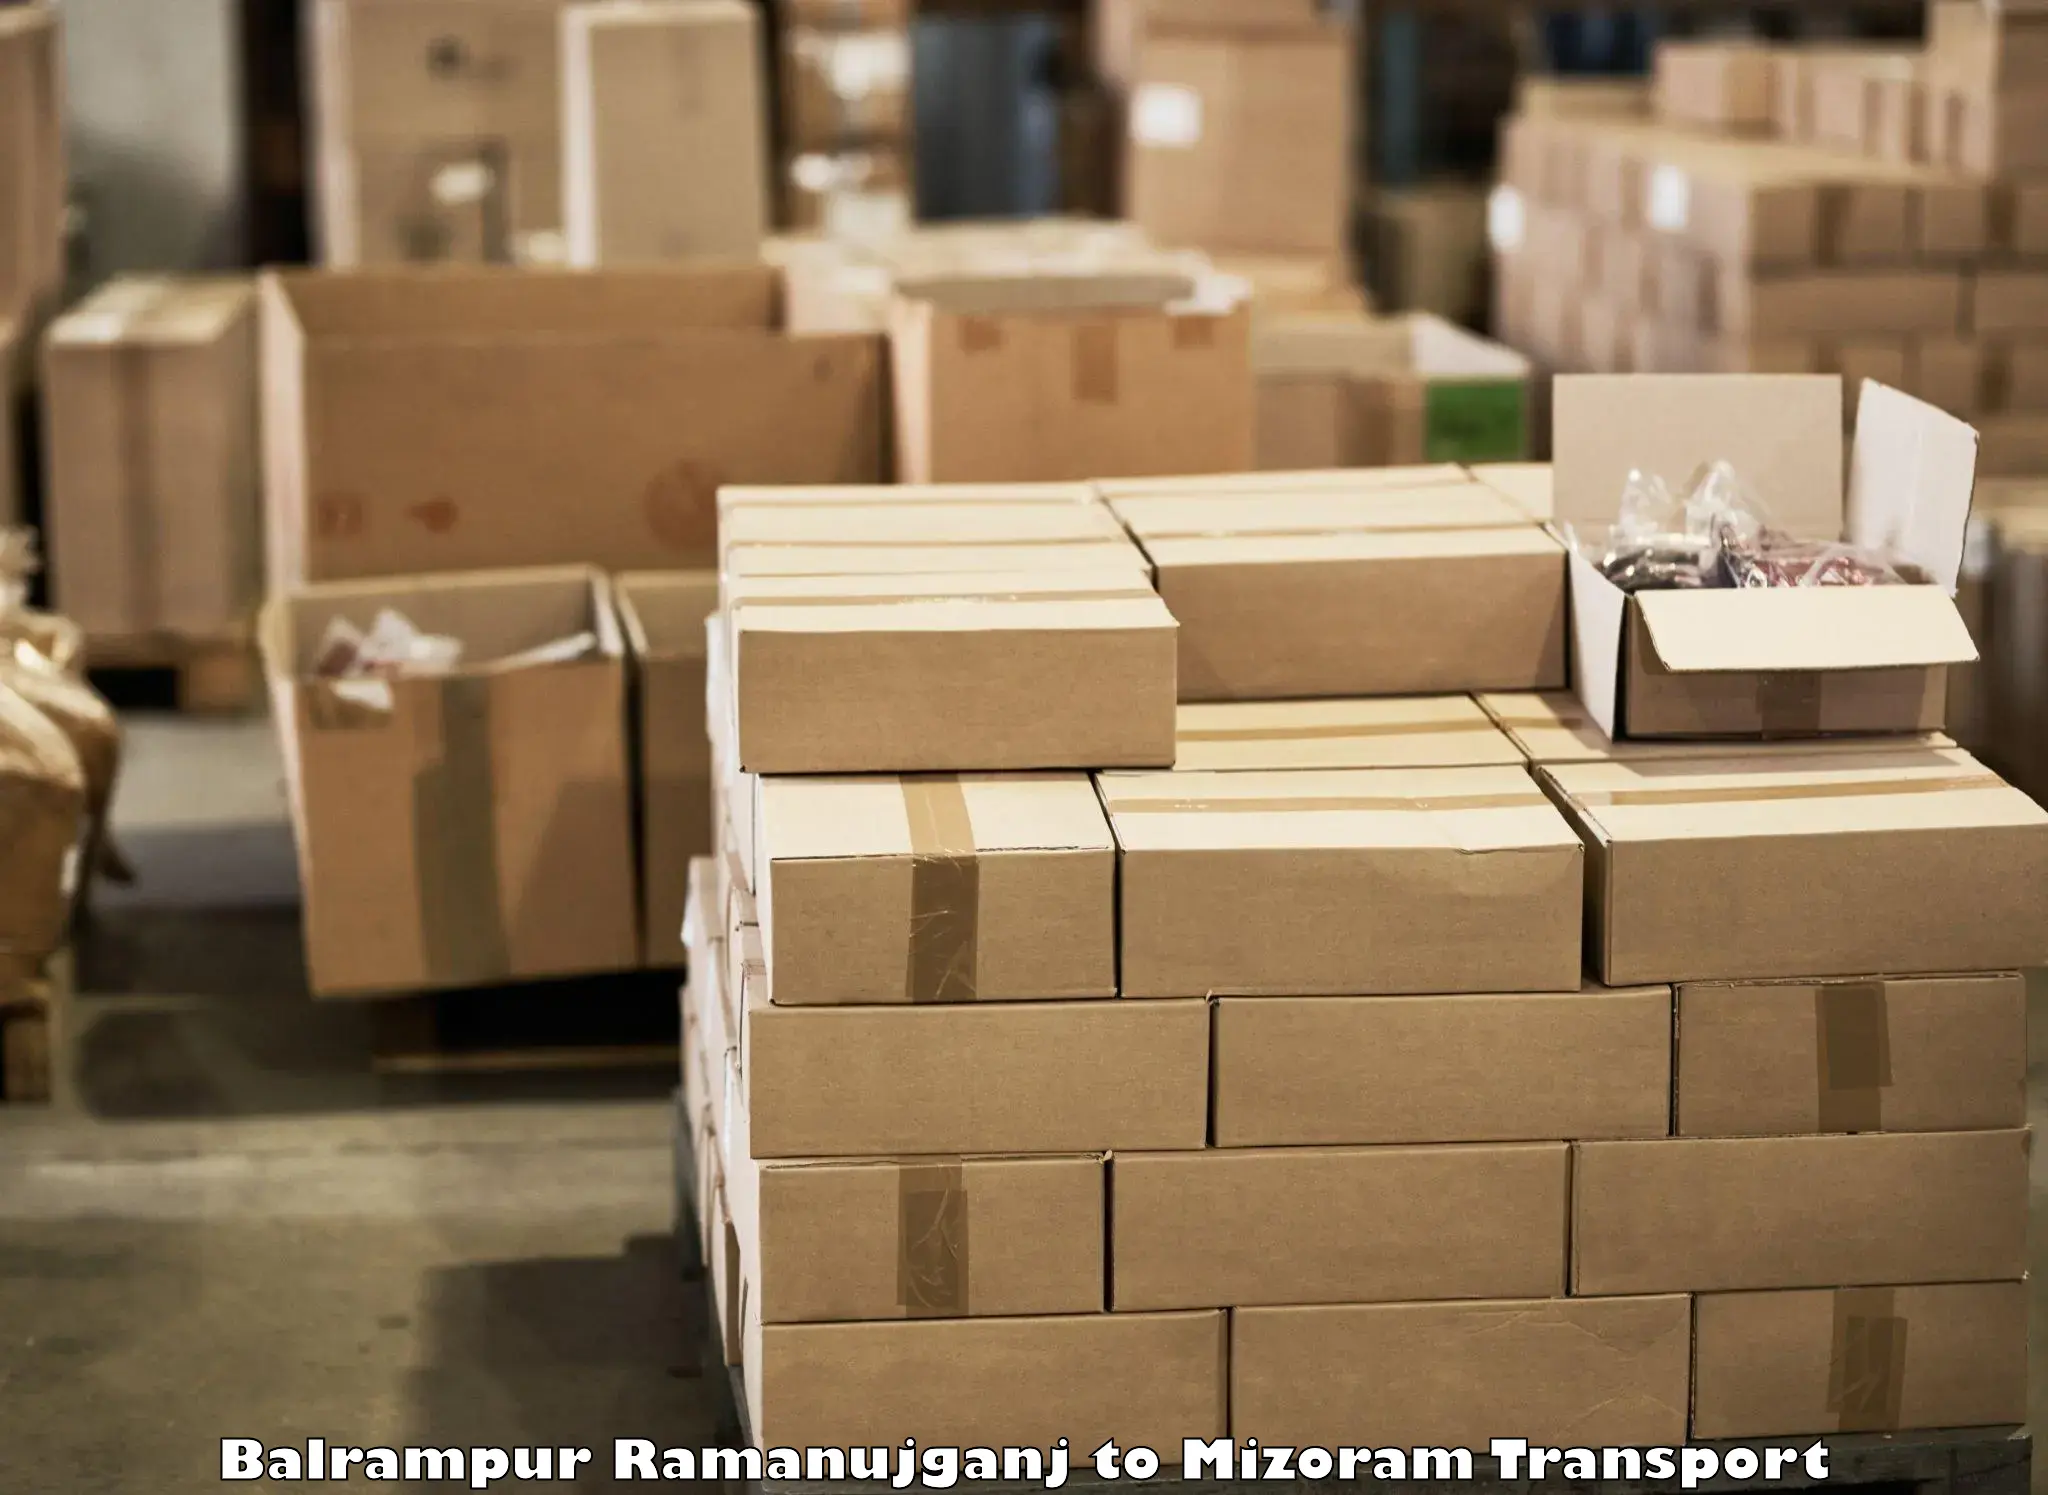 Package delivery services Balrampur Ramanujganj to Mizoram